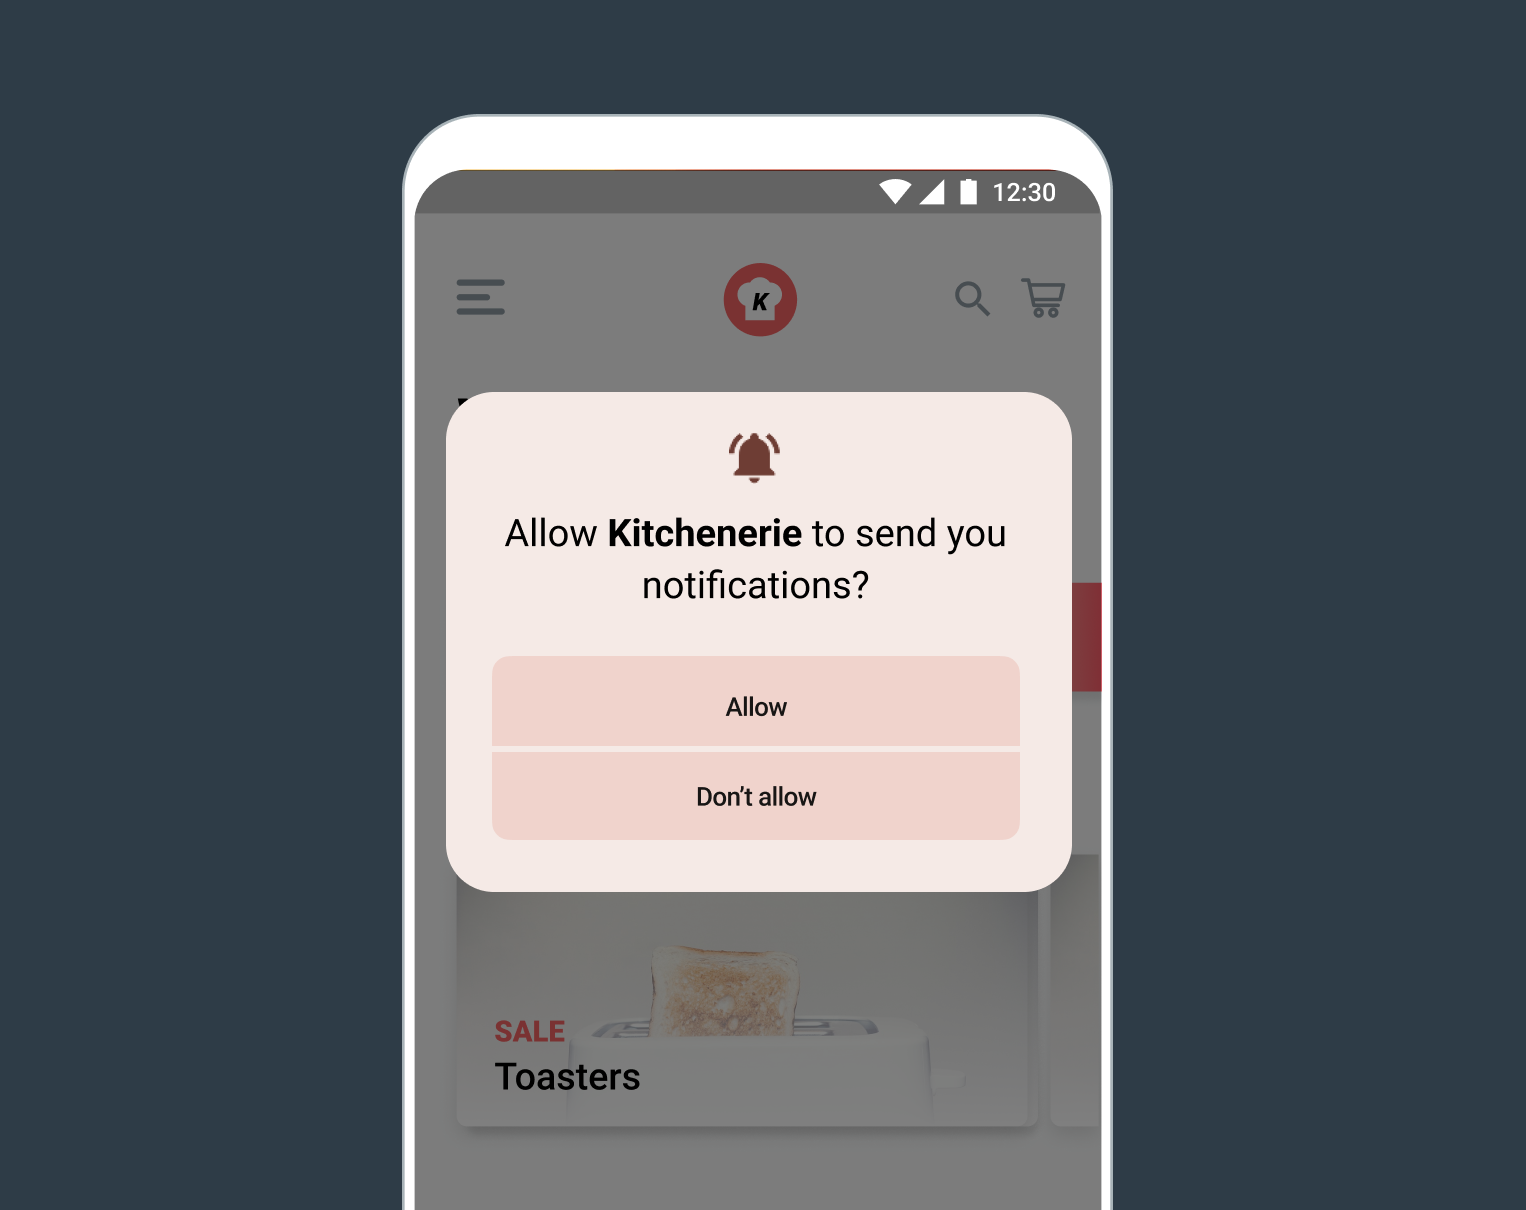 An Android push message asking "Allow Kitchenerie to send you notifications?" with two buttons, "Allow" and "Don't allow" at the bottom of the message.